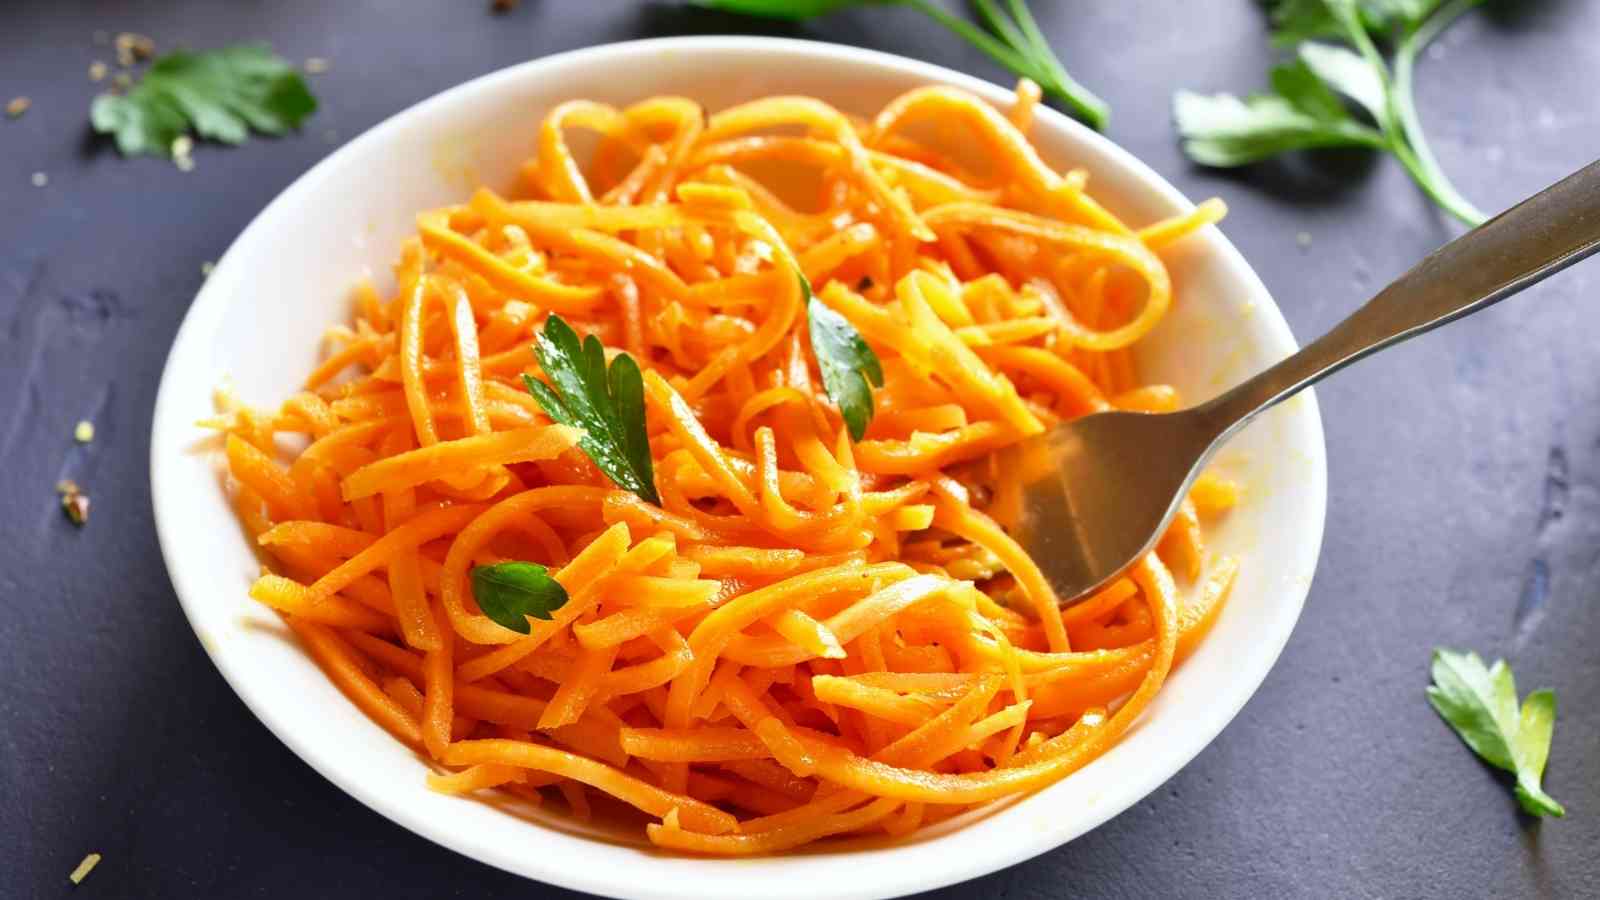 Carrots: How to Cook Them